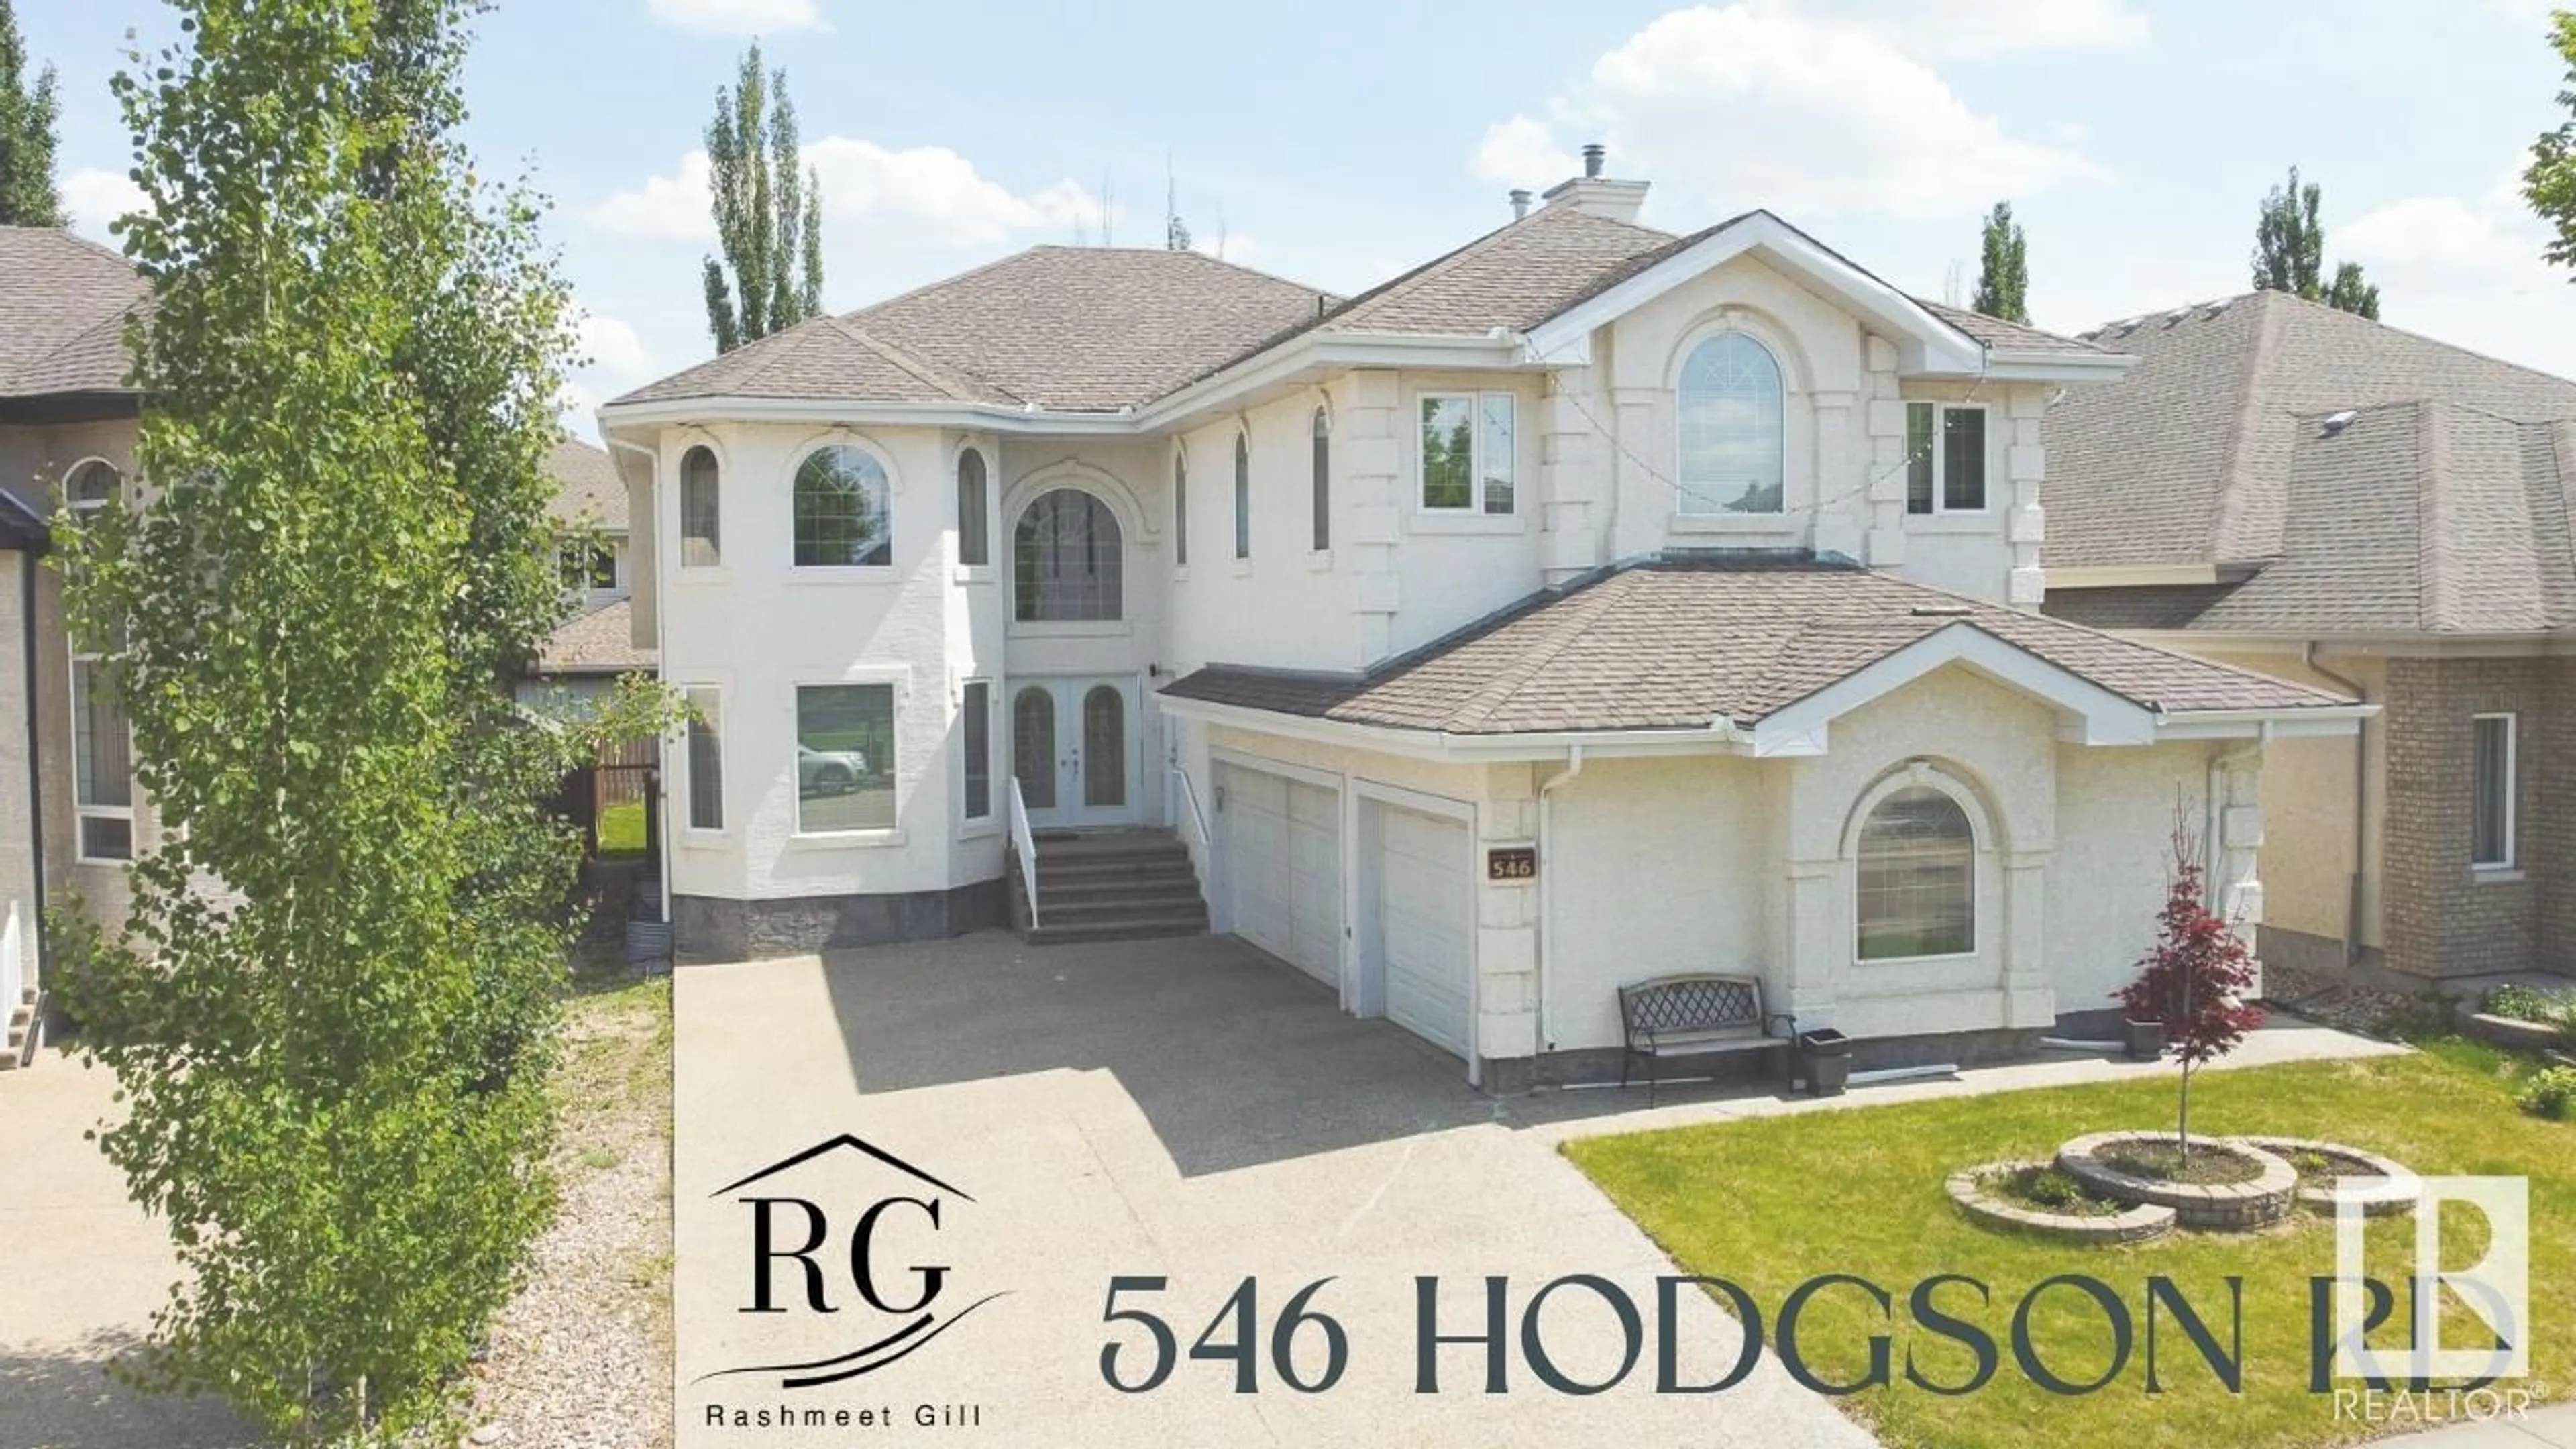 Frontside or backside of a home for 546 HODGSON RD NW, Edmonton Alberta T6R3G6